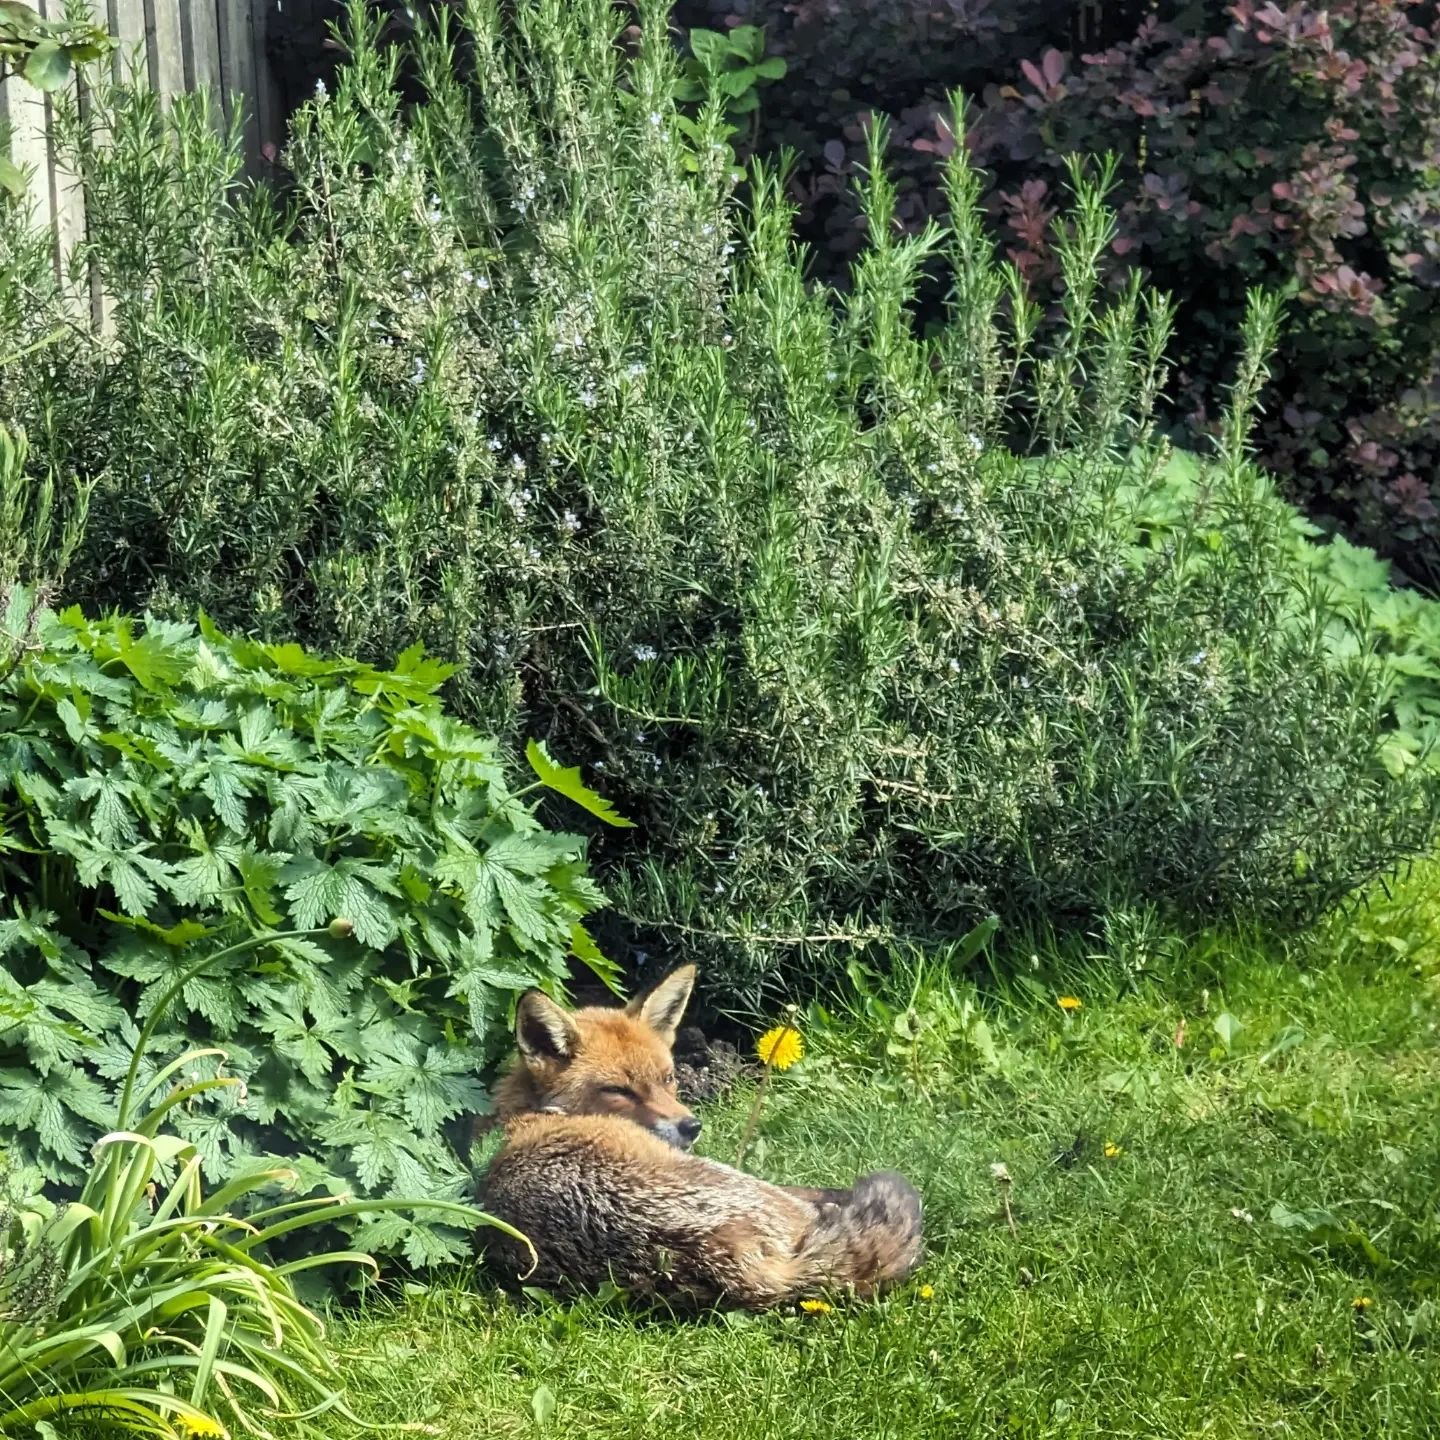 Yesterday there was a fox in our Garden.